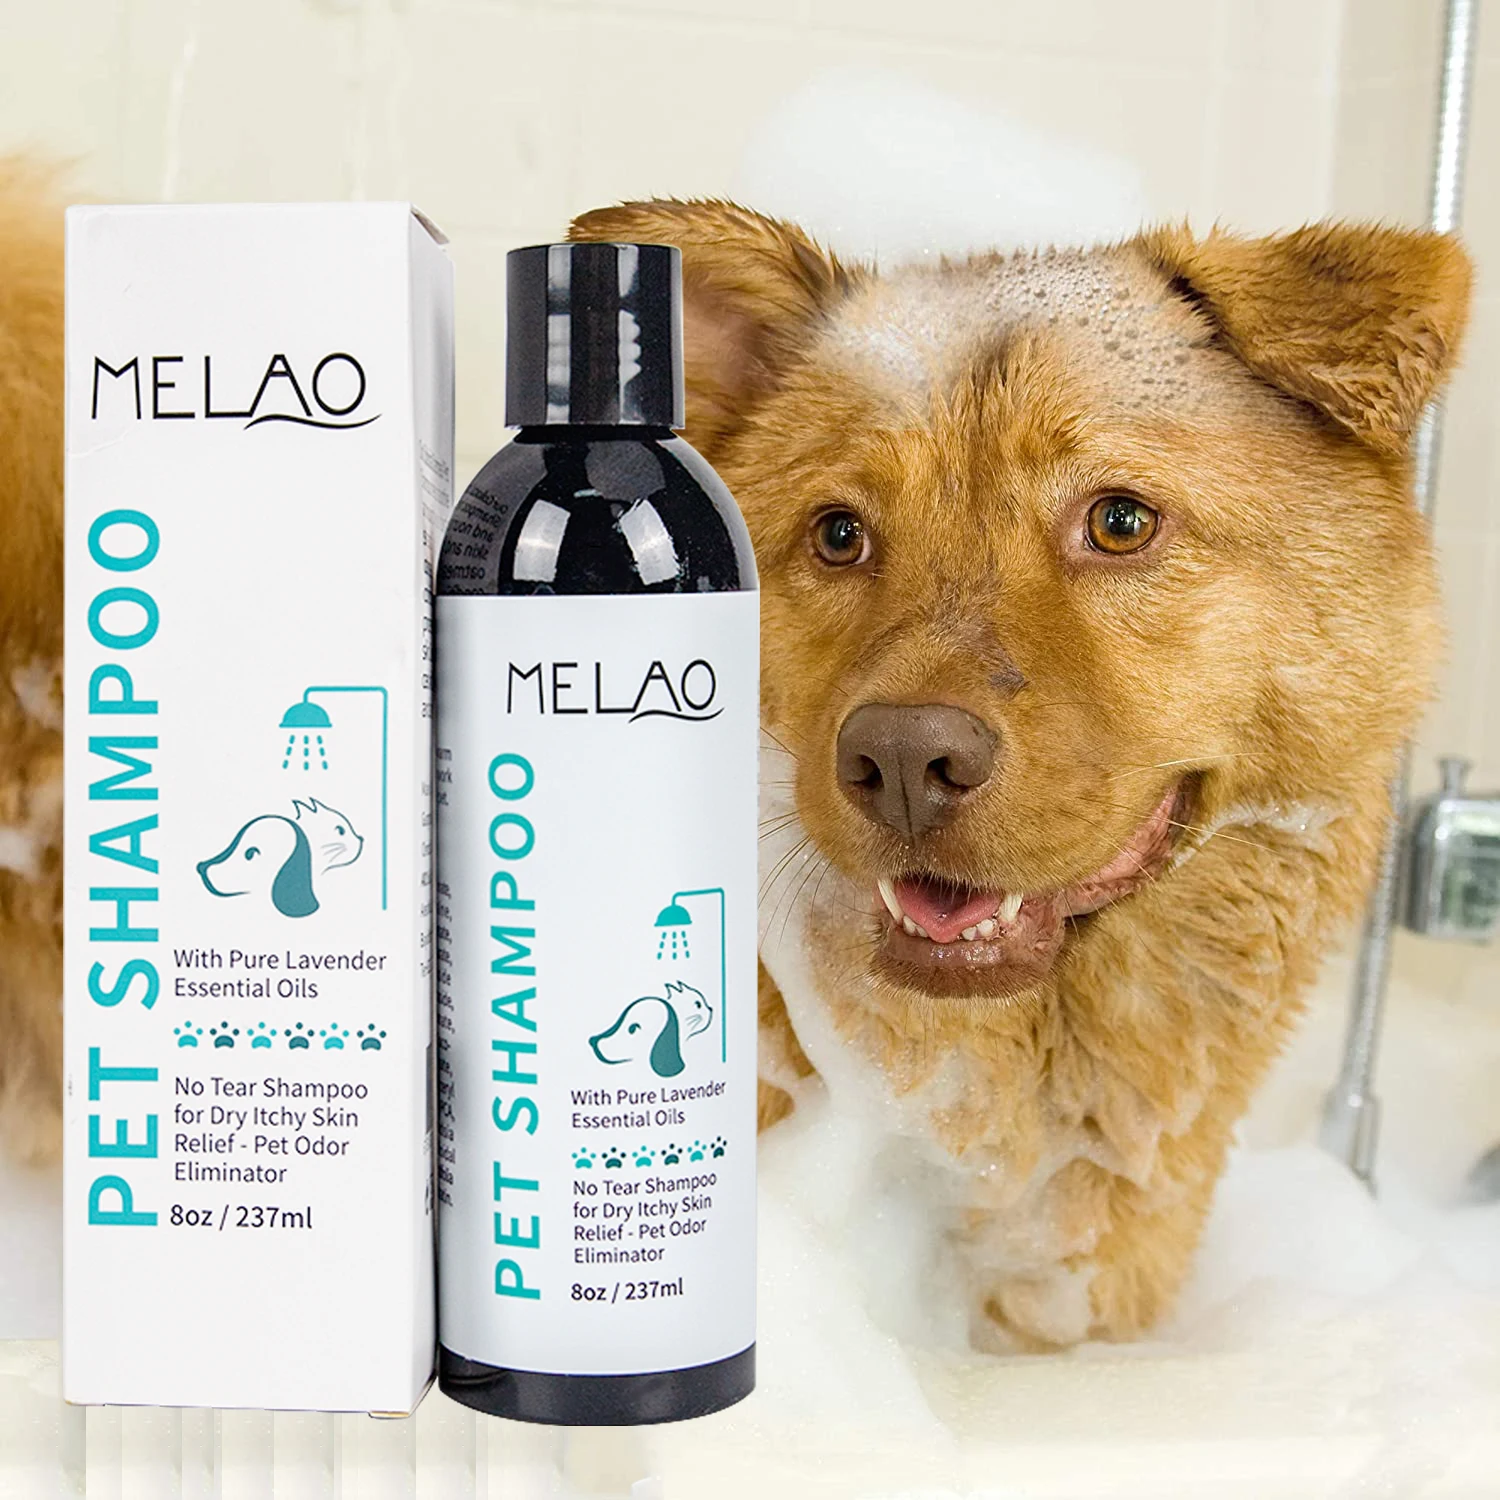 

01 MELAO Dog Cat Natural Organic Clean Sensitive Grooming Anti Itch Moisturizing Pet Shampoo Conditioner Private Label